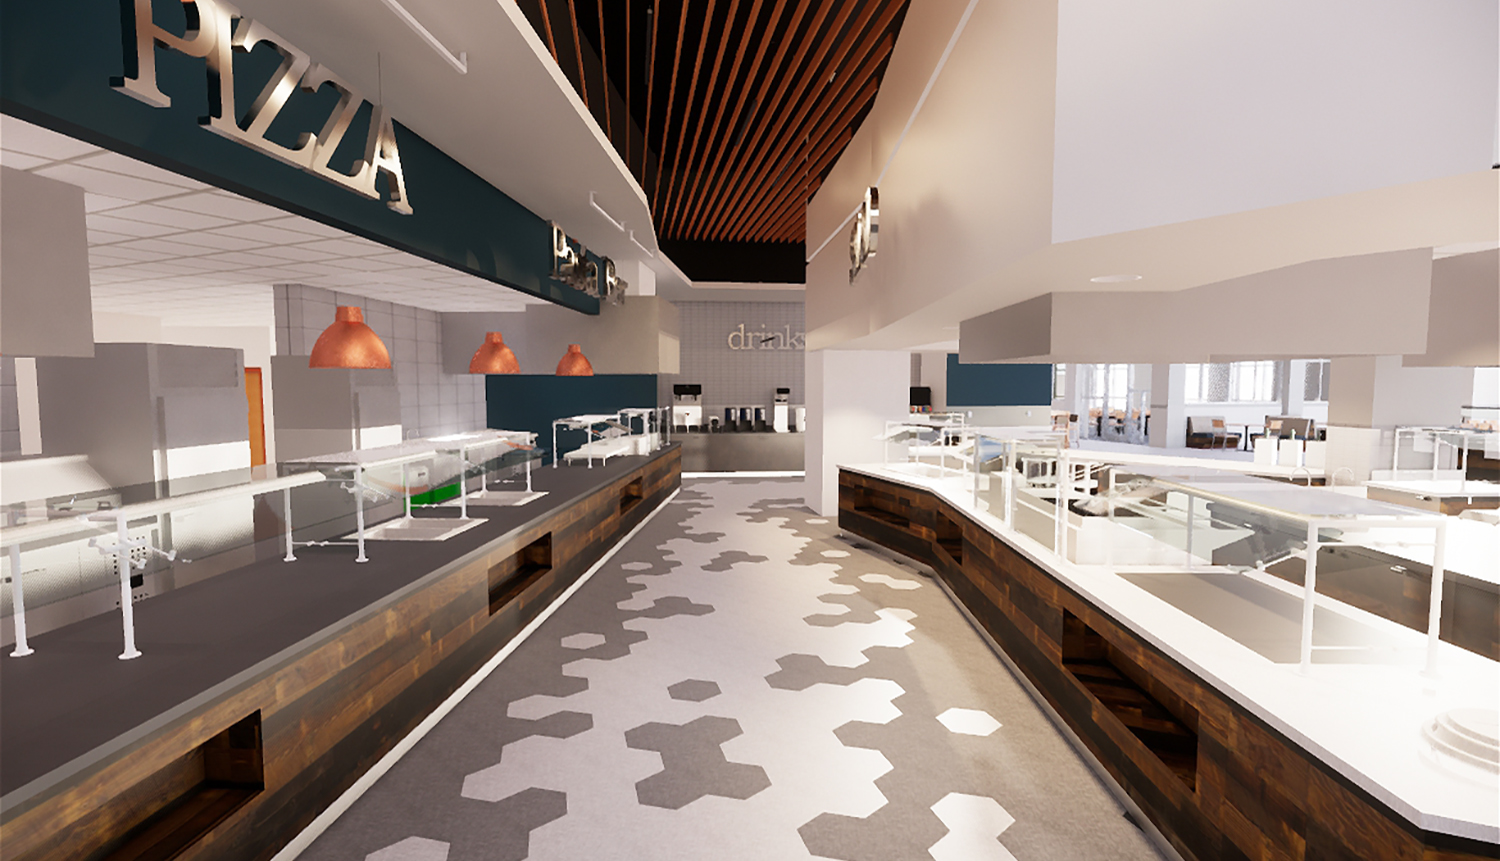 Village View Dining Facility Renovations